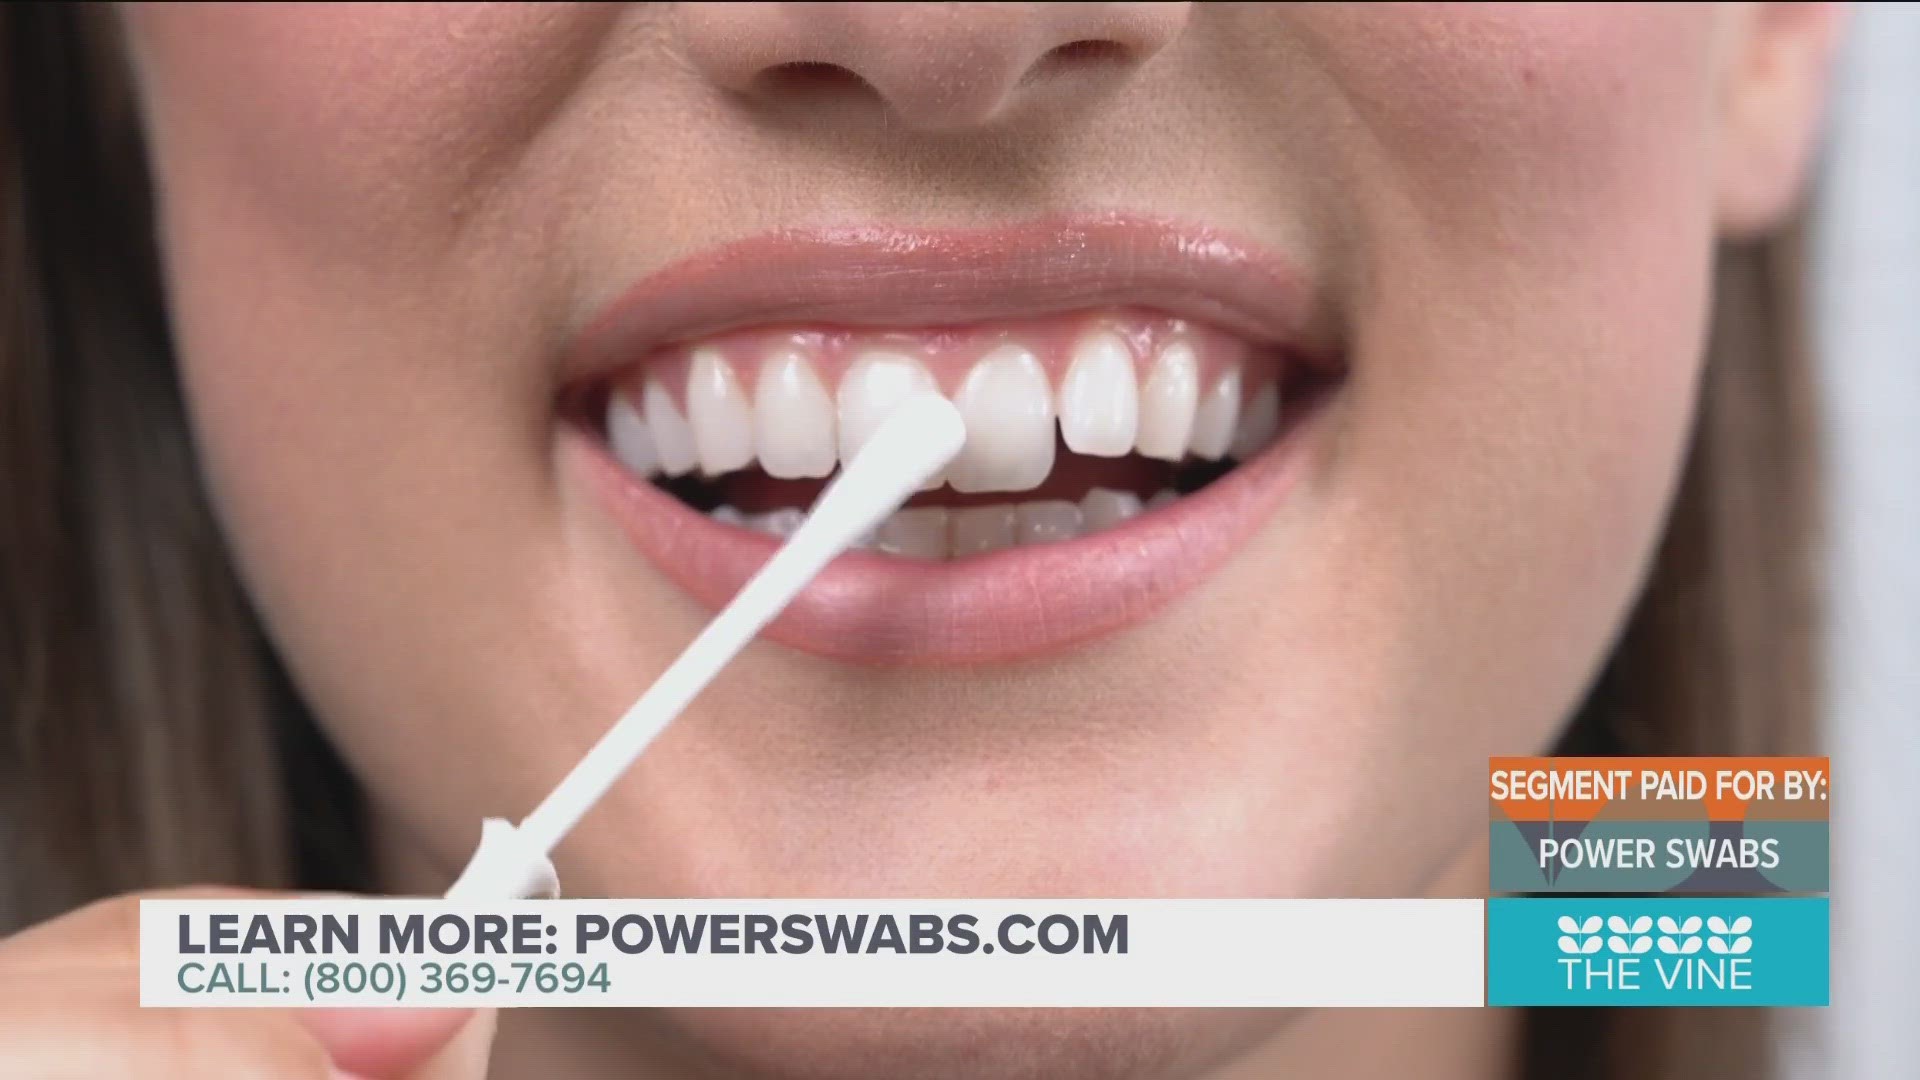 SEGMENT PAID FOR BY: Power Swabs. Learn more at powerswabs.com!